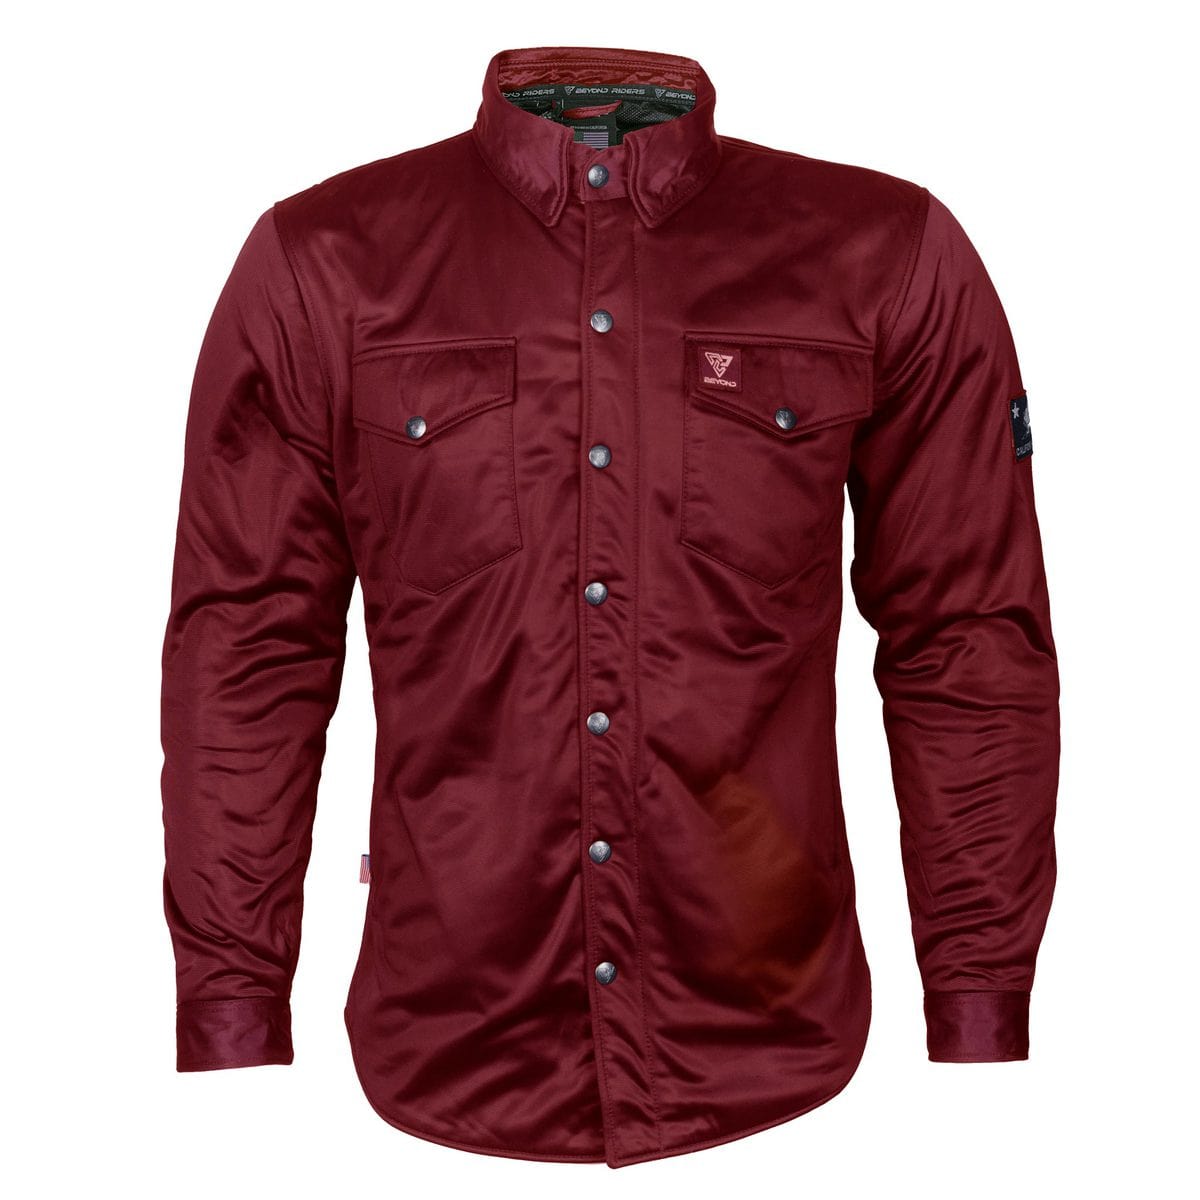 Ultra Protective Shirt - Red Maroon Solid with Pads